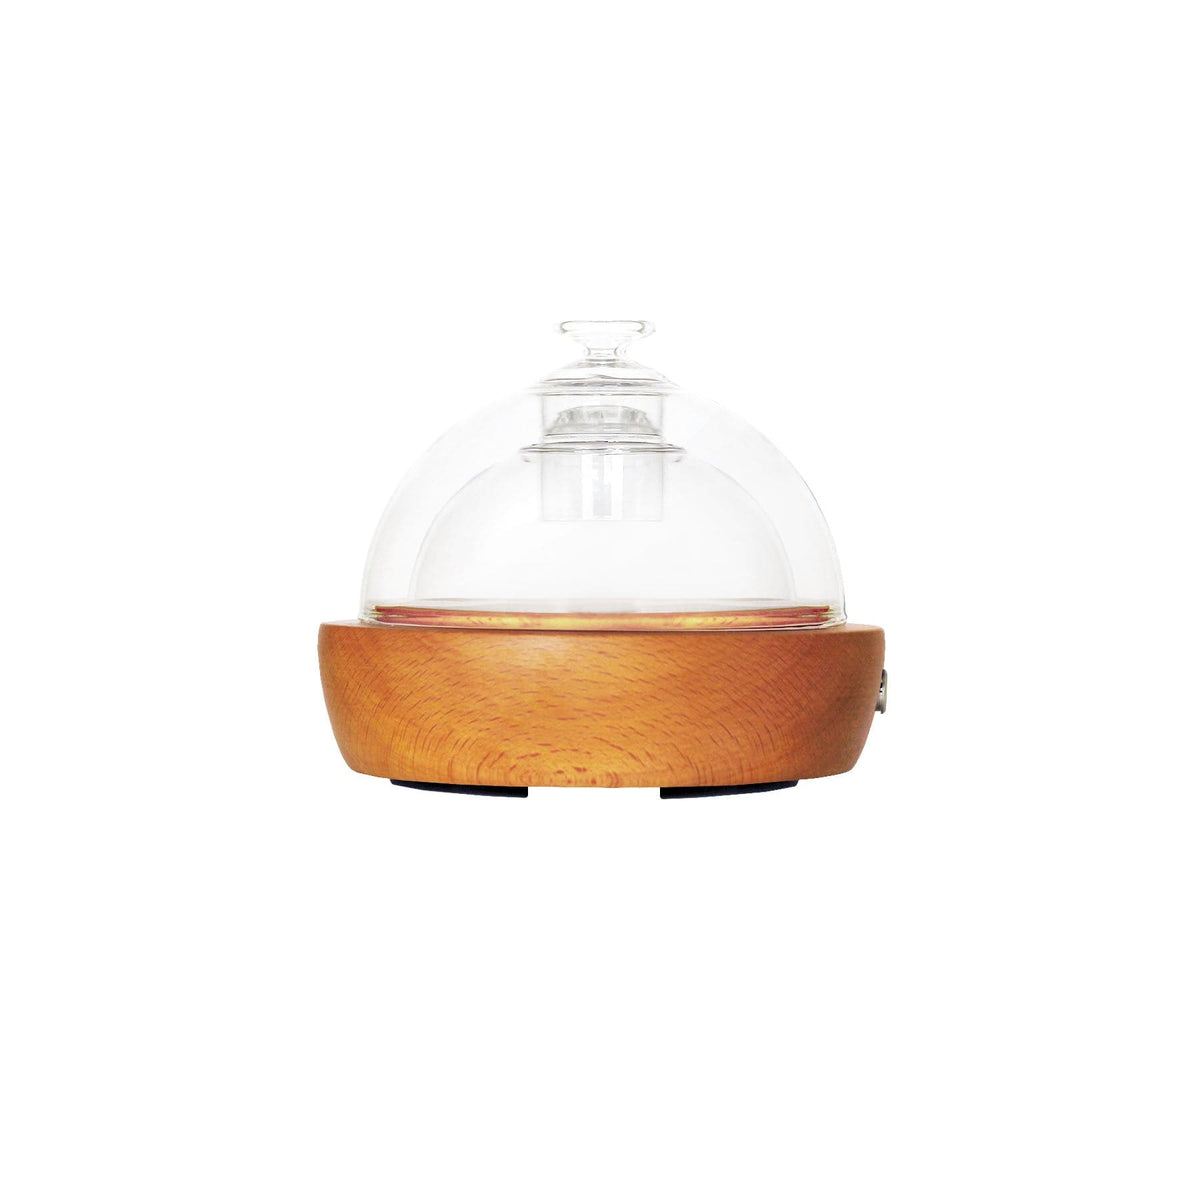 Hysses Burners/Devices Ultrasonic Water Mist, Dome